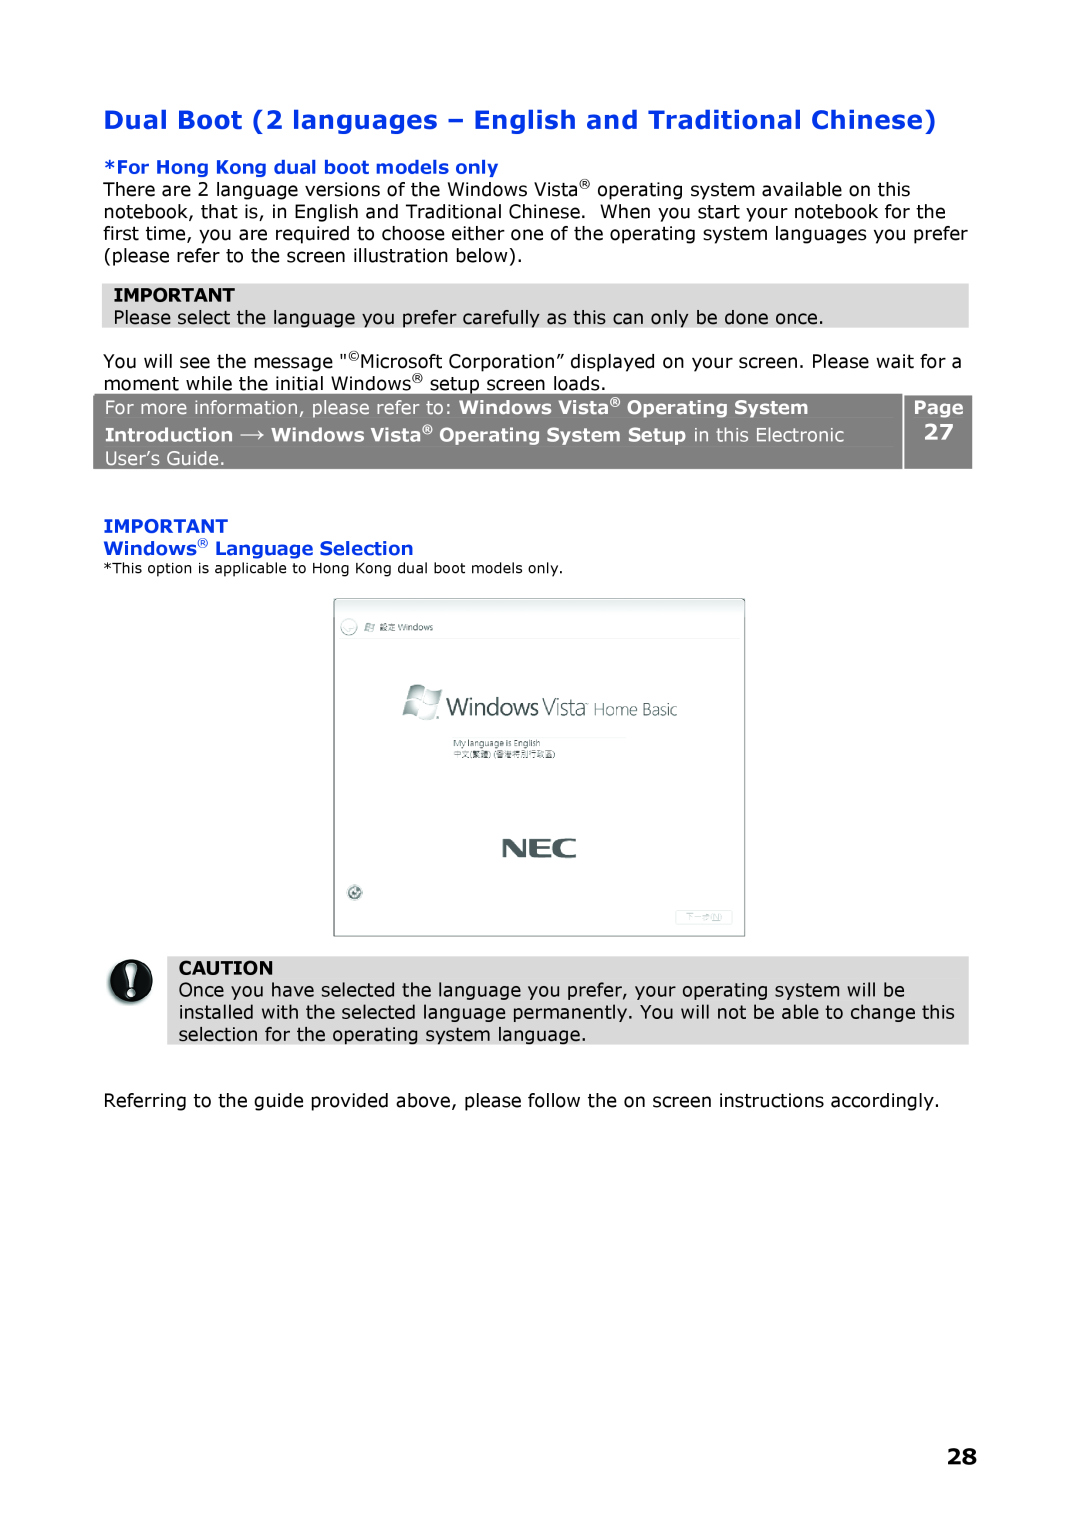 NEC P8510 Dual Boot 2 languages - English and Traditional Chinese, For Hong Kong dual boot models only, User’s Guide, Page 